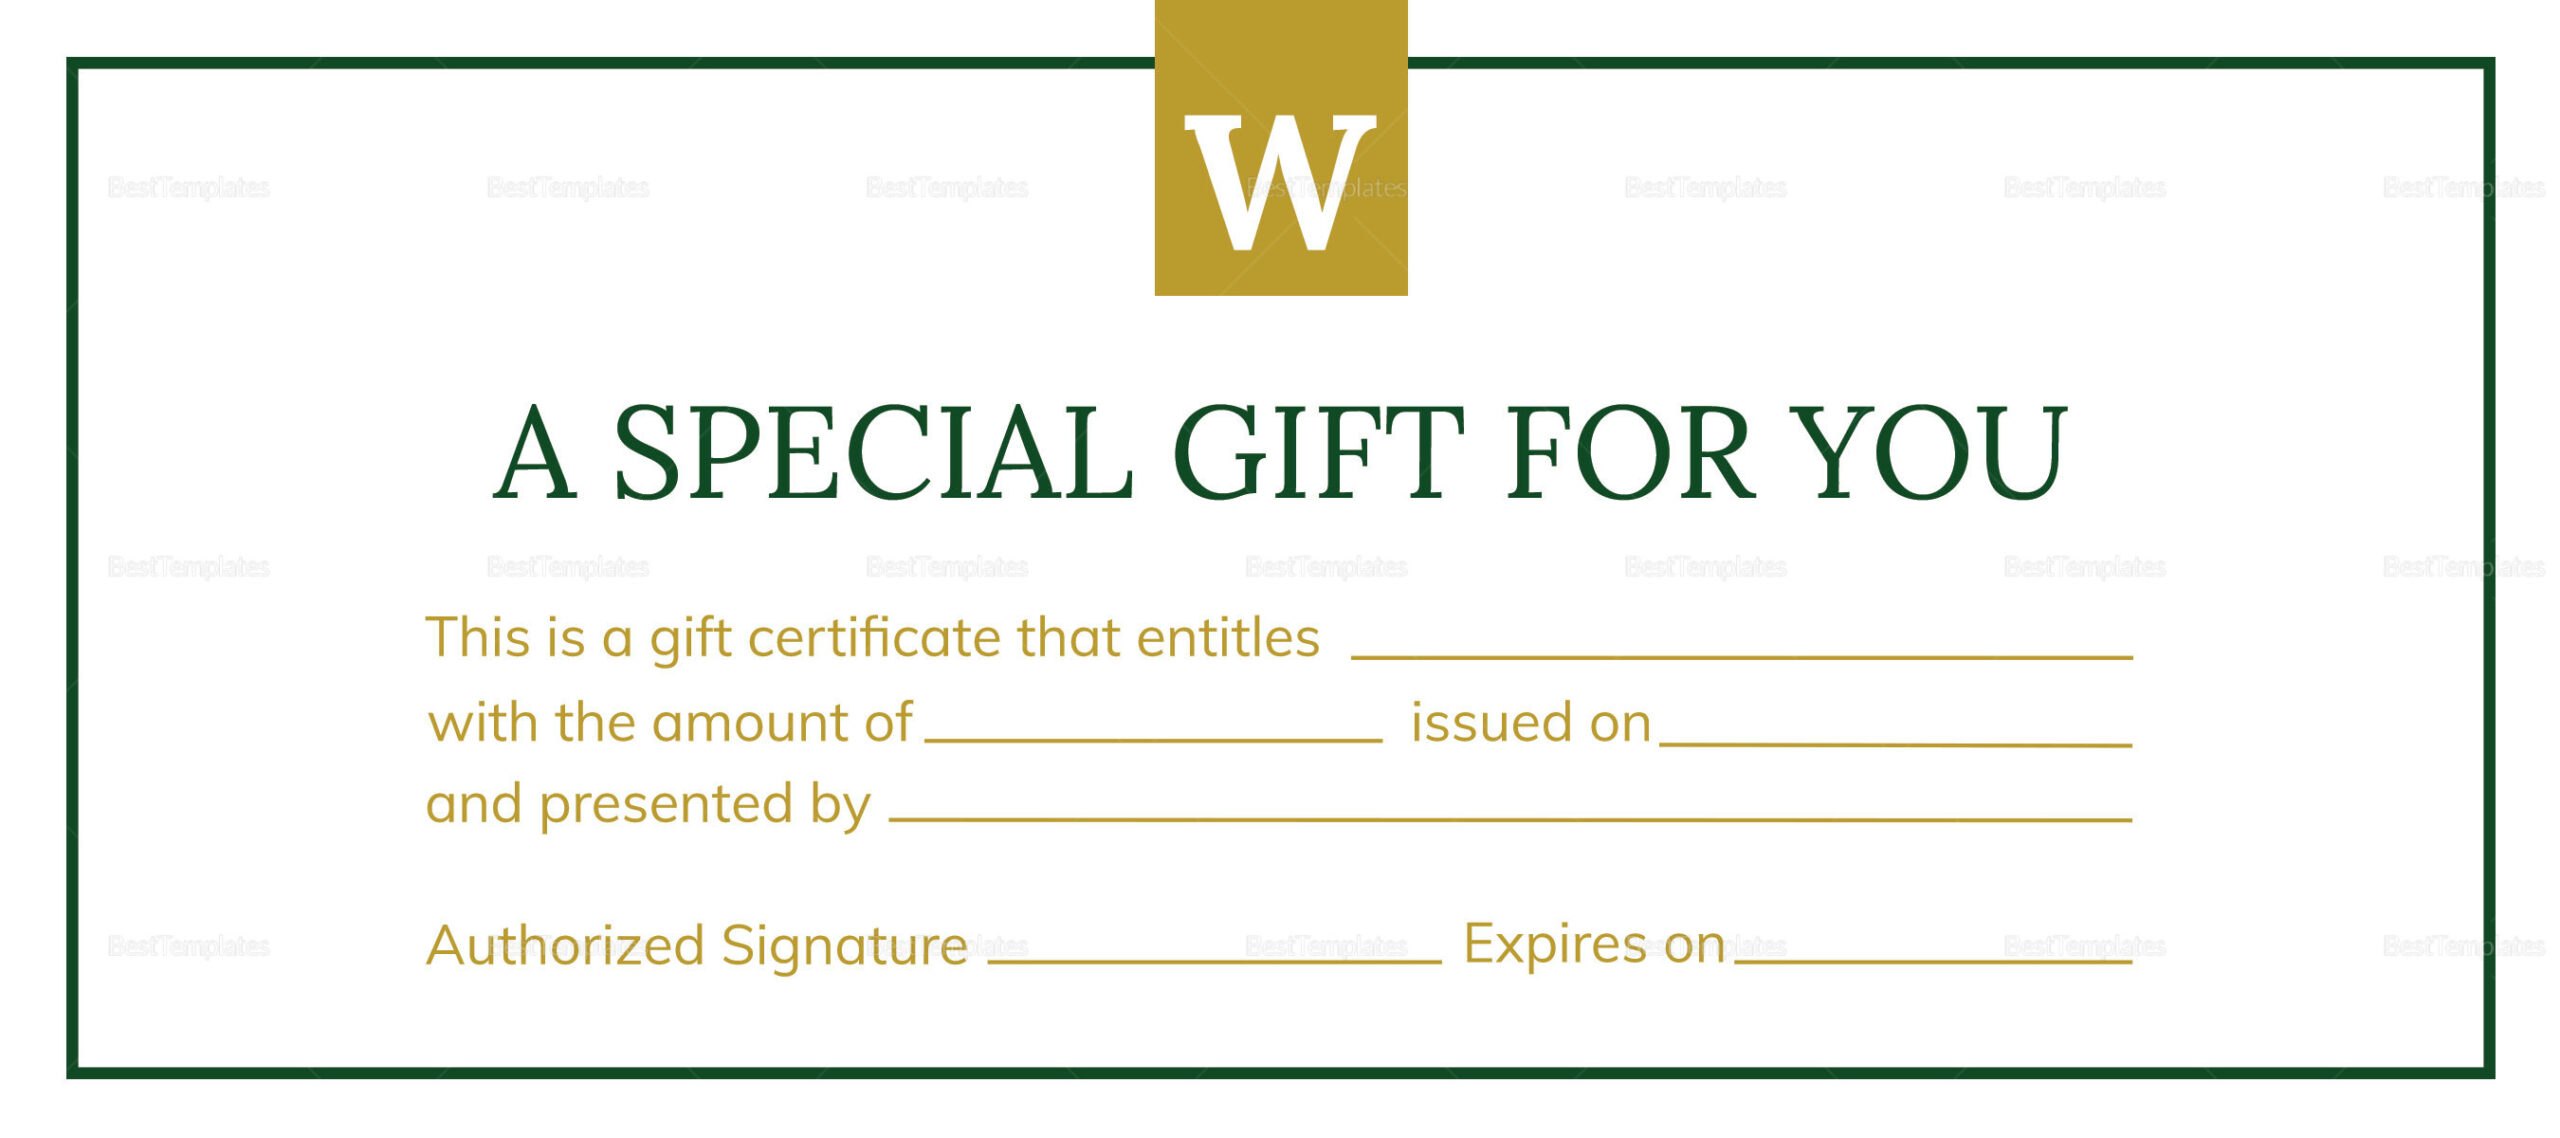 Gift Certificate Templates Indesign Illustrator Gift Coupon Intended For Indesign Certificate Template